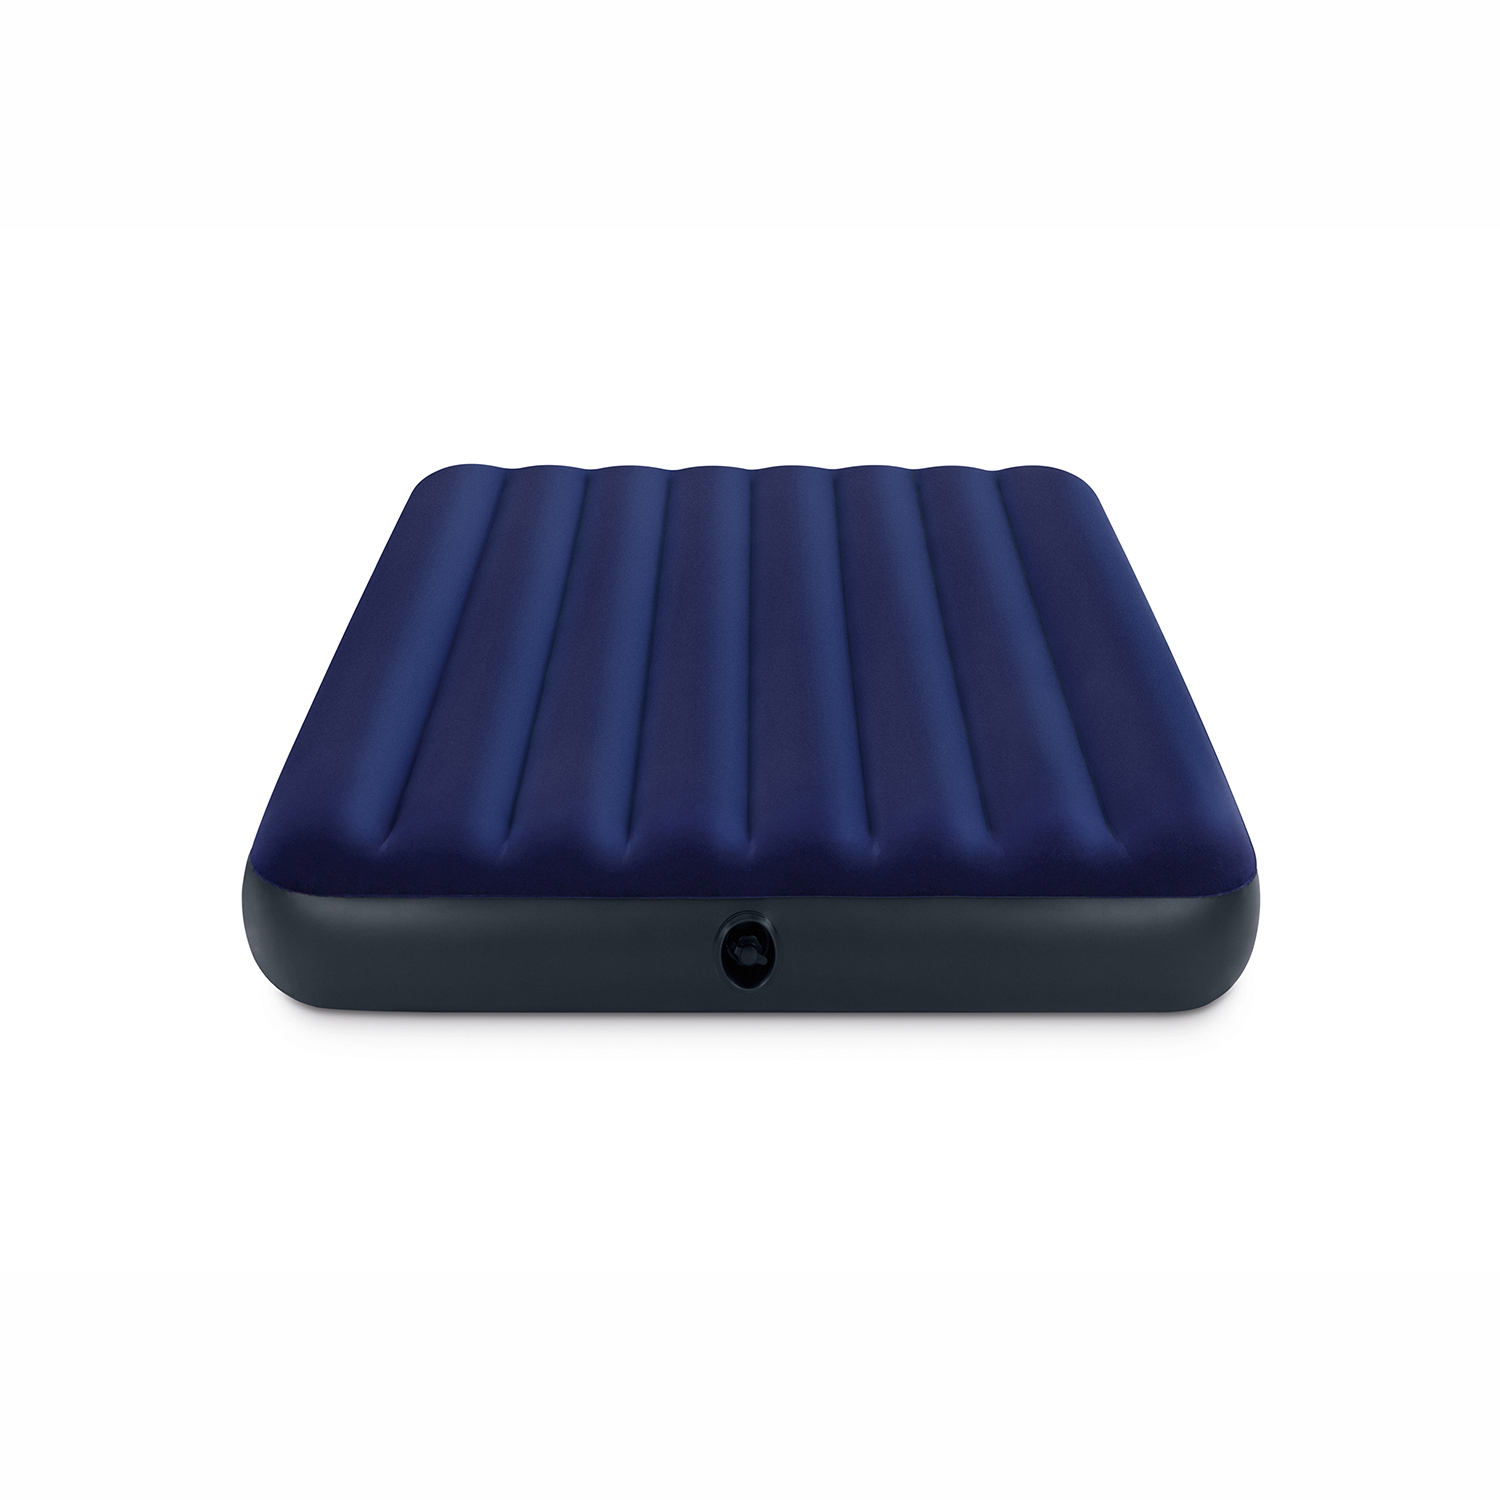 Intex Full 8.75" Classic Downy Inflatable Airbed Mattress - image 3 of 6